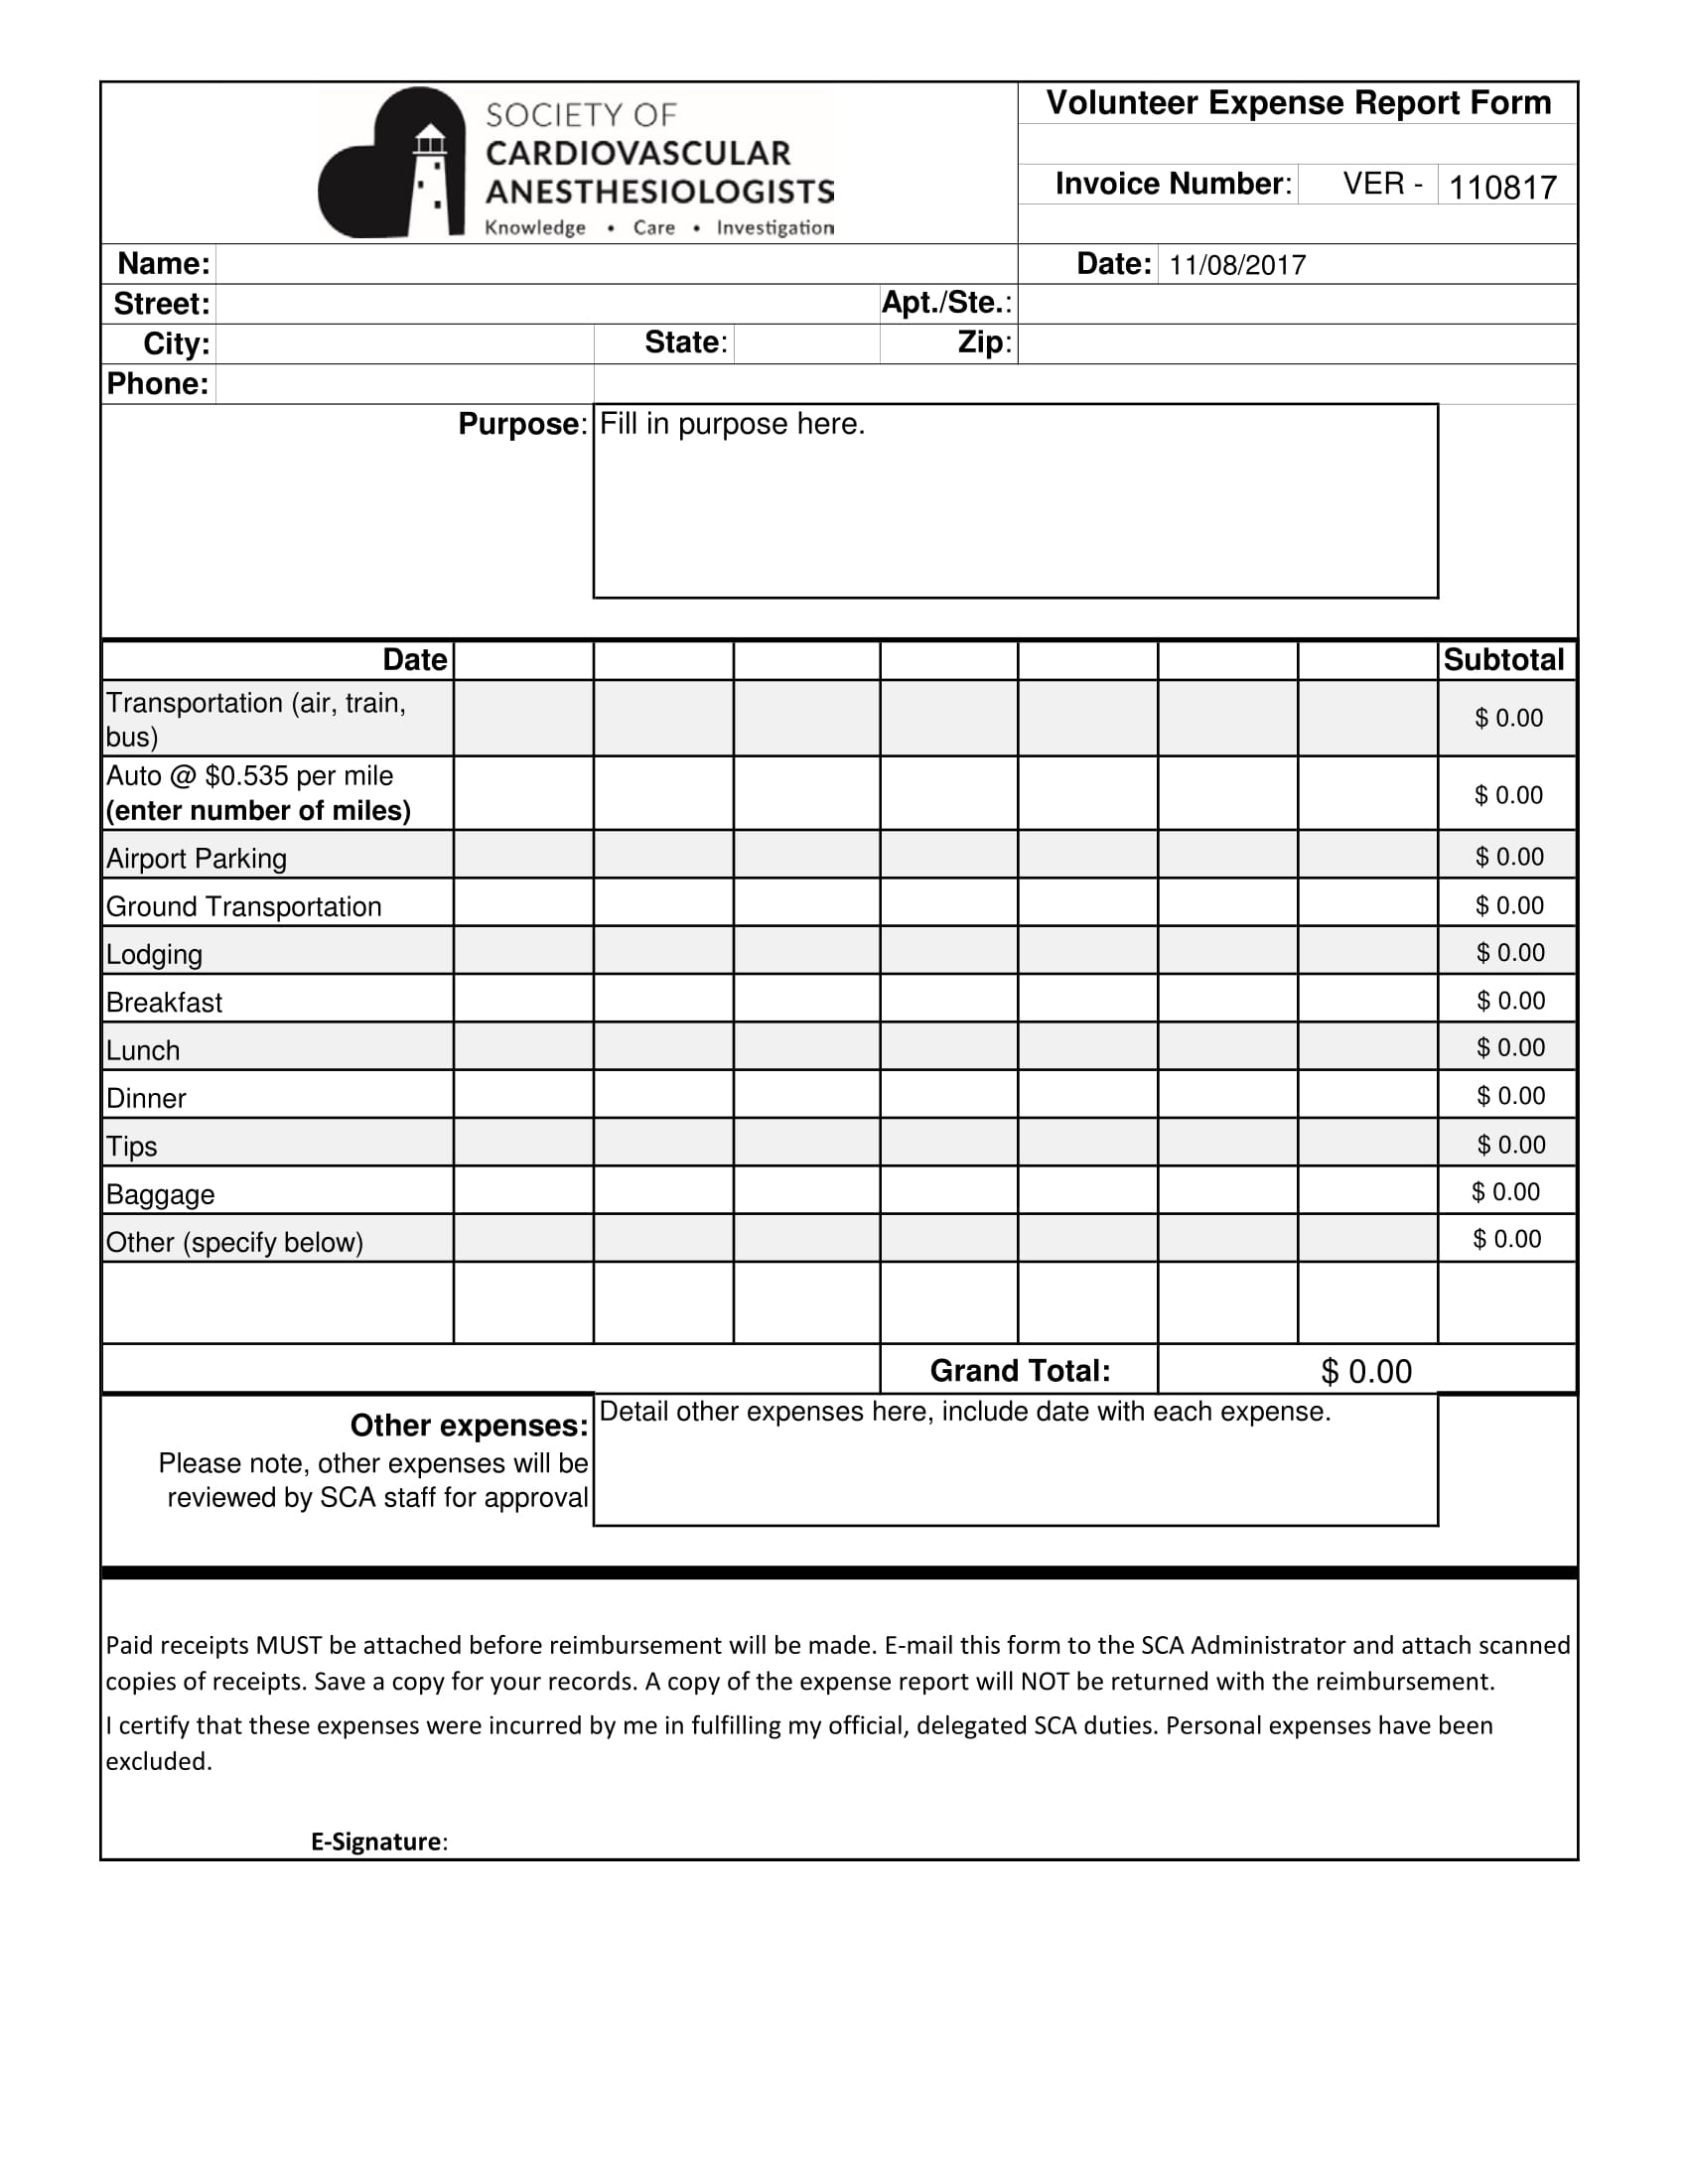 fillable expense report form 1